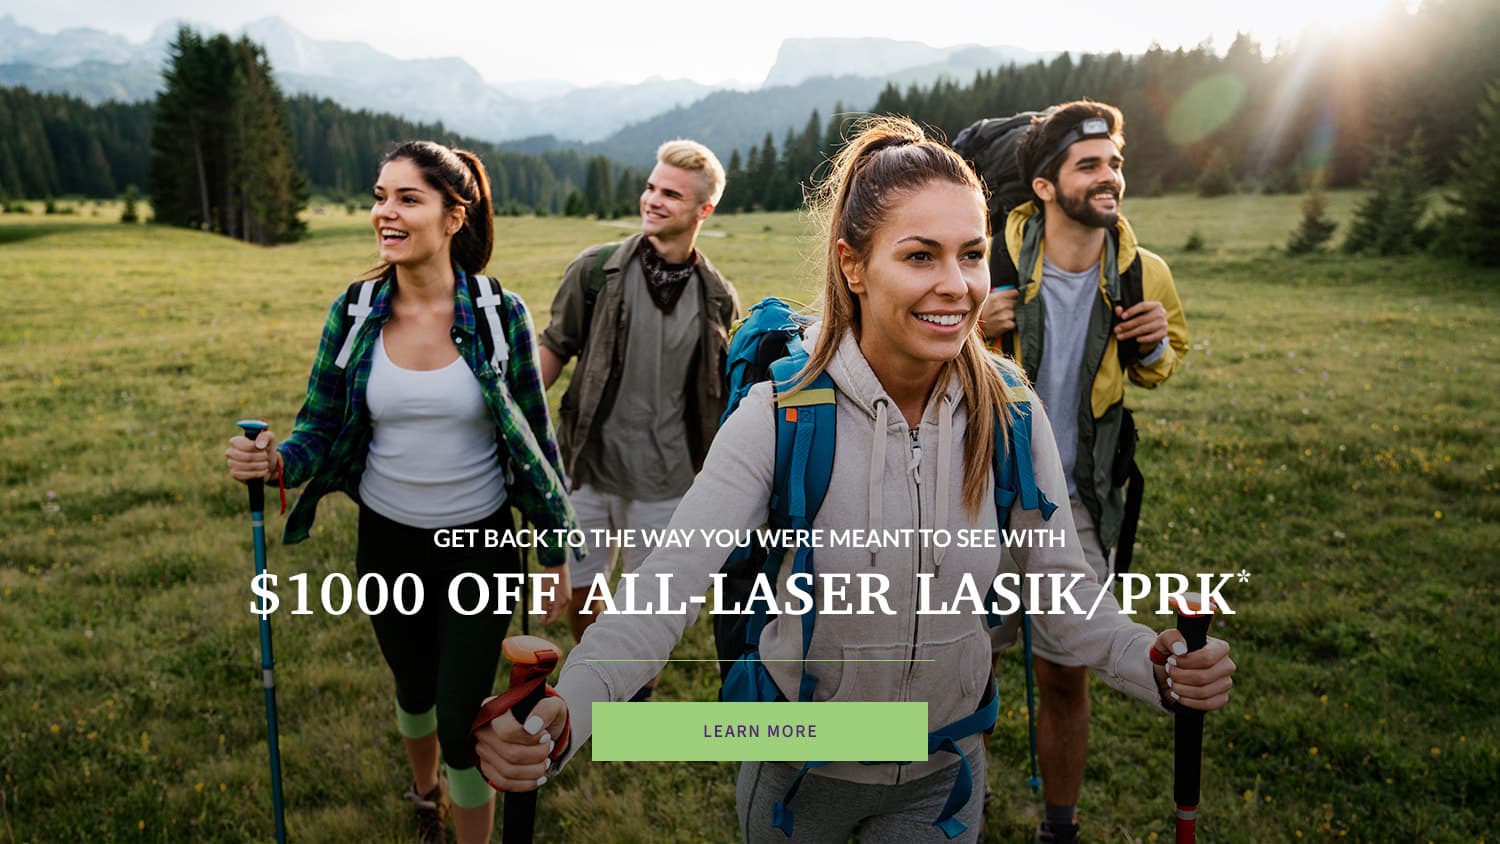 GET BACK TO THE WAY YOU WERE MEANT TO SEE WITH
$1000 OFF ALL-LASER LASIK/PRK*